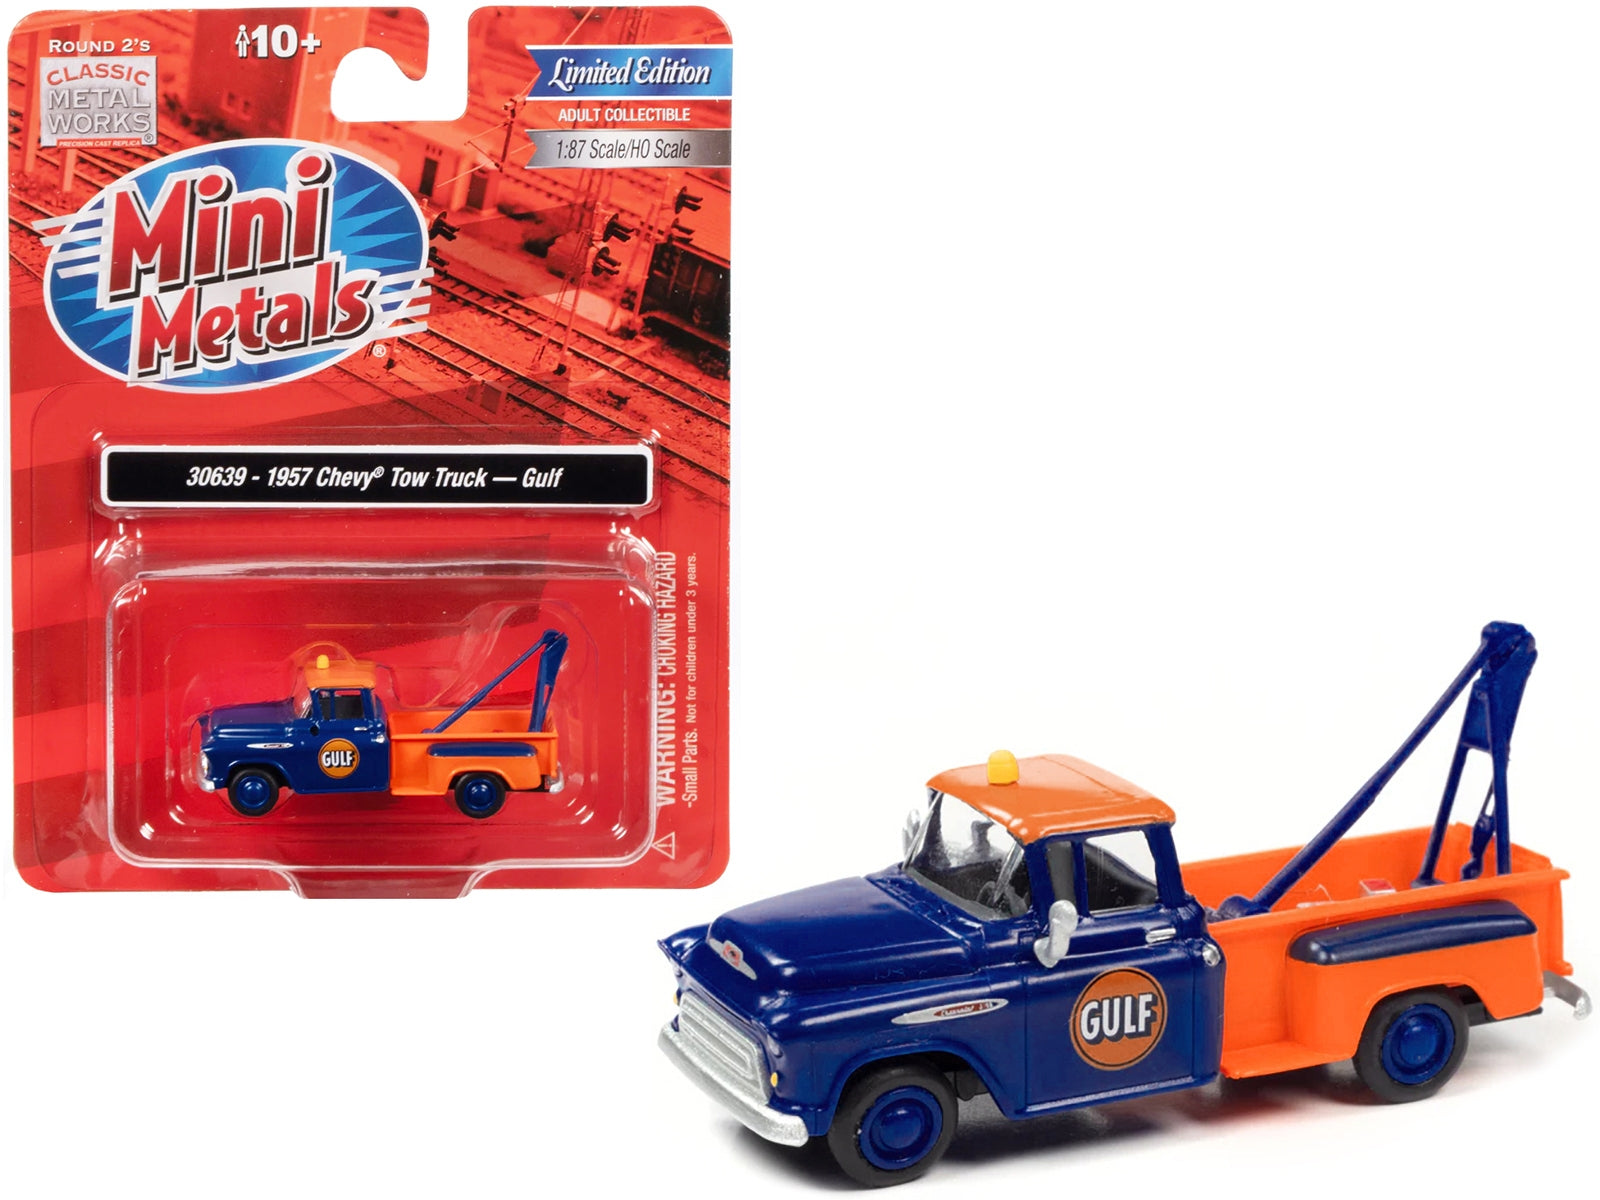 1957 Chevrolet Stepside Tow Truck "Gulf" Blue and Orange 1/87 (HO) Scale Model Car by Classic Metal Works Classic Metal Works